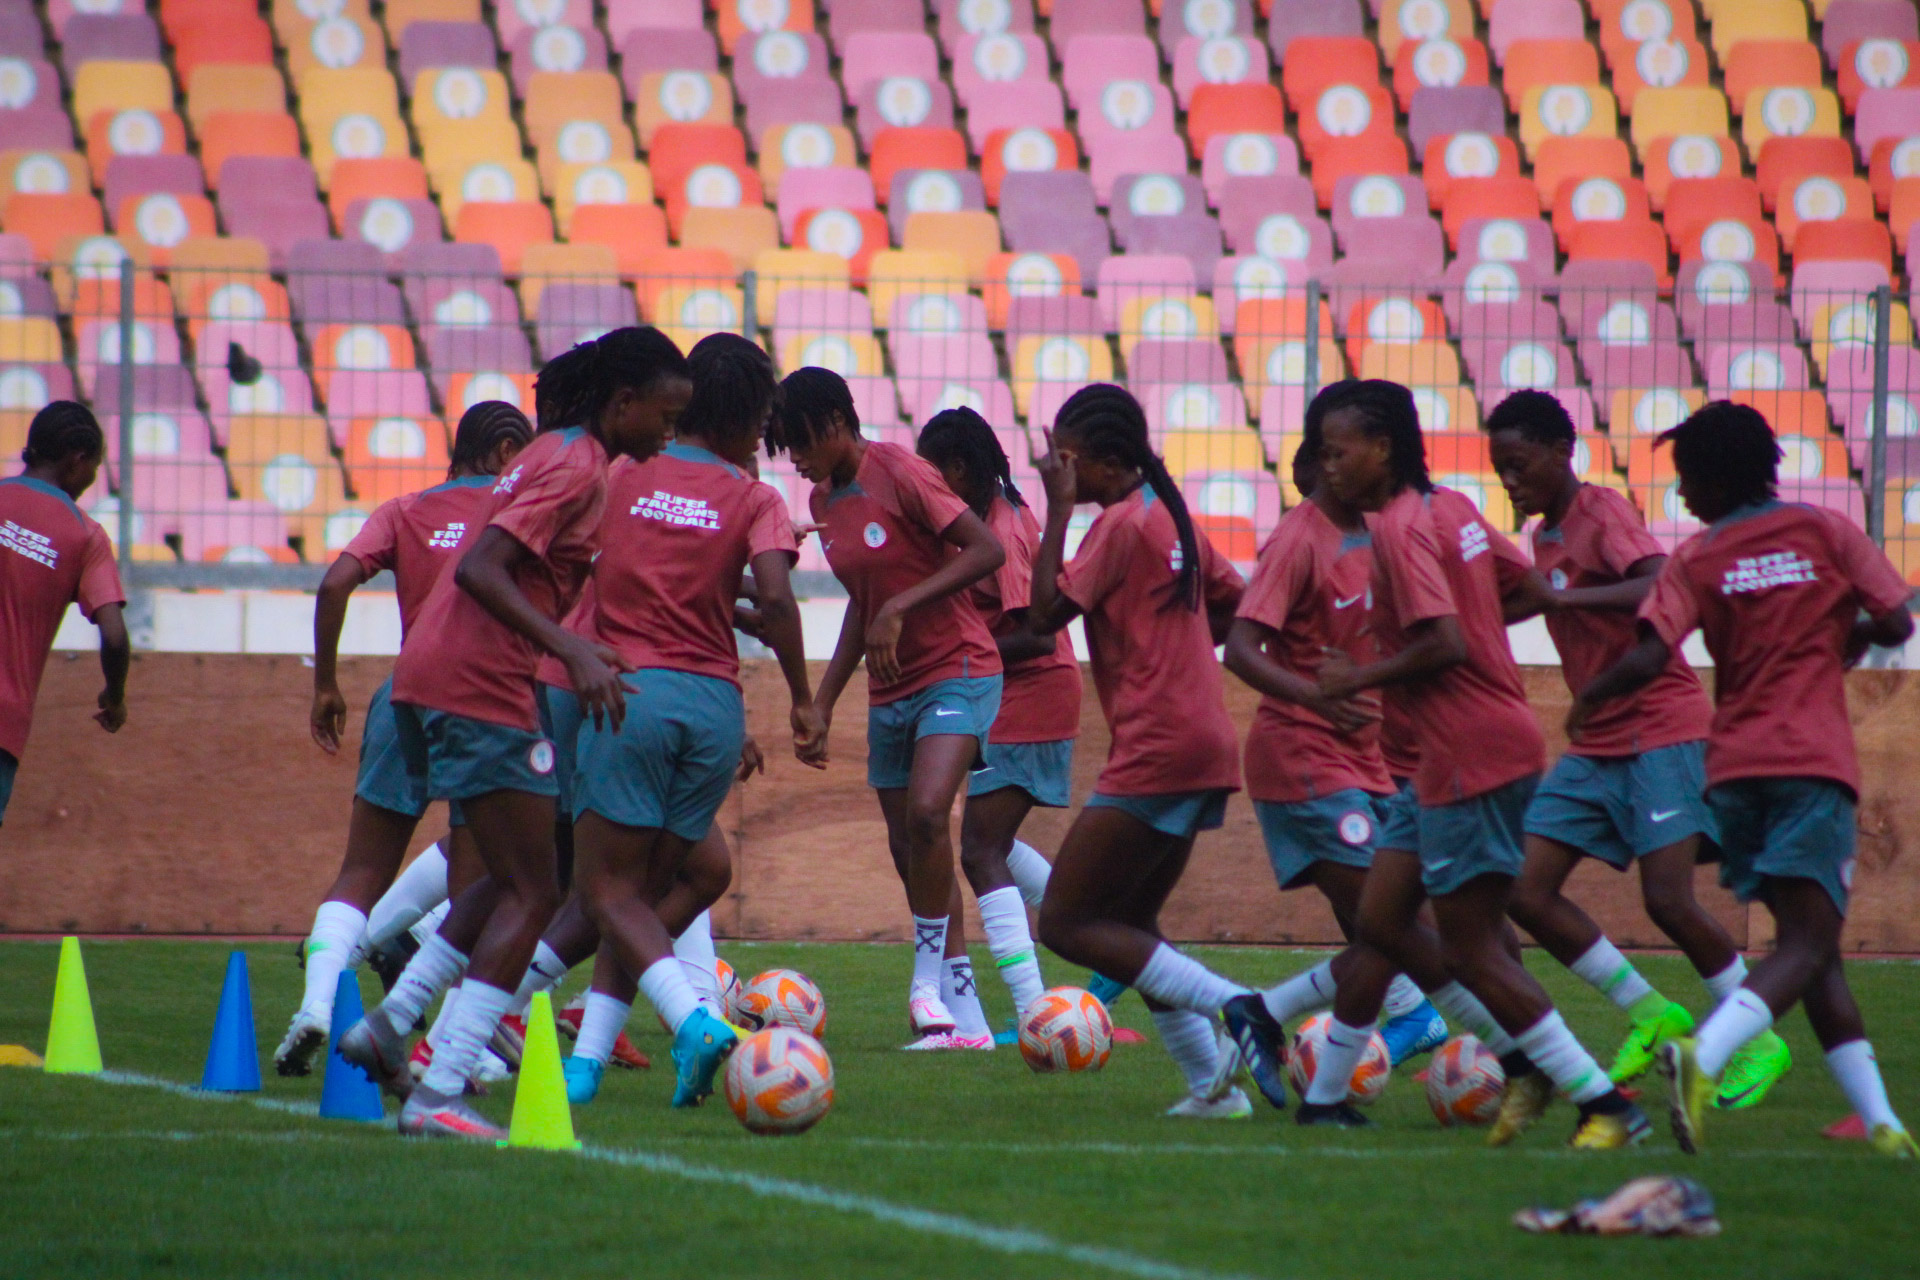 Super Falcons Squad Revealed for WAFCON Qualifiers - Onome Ebi Misses Out